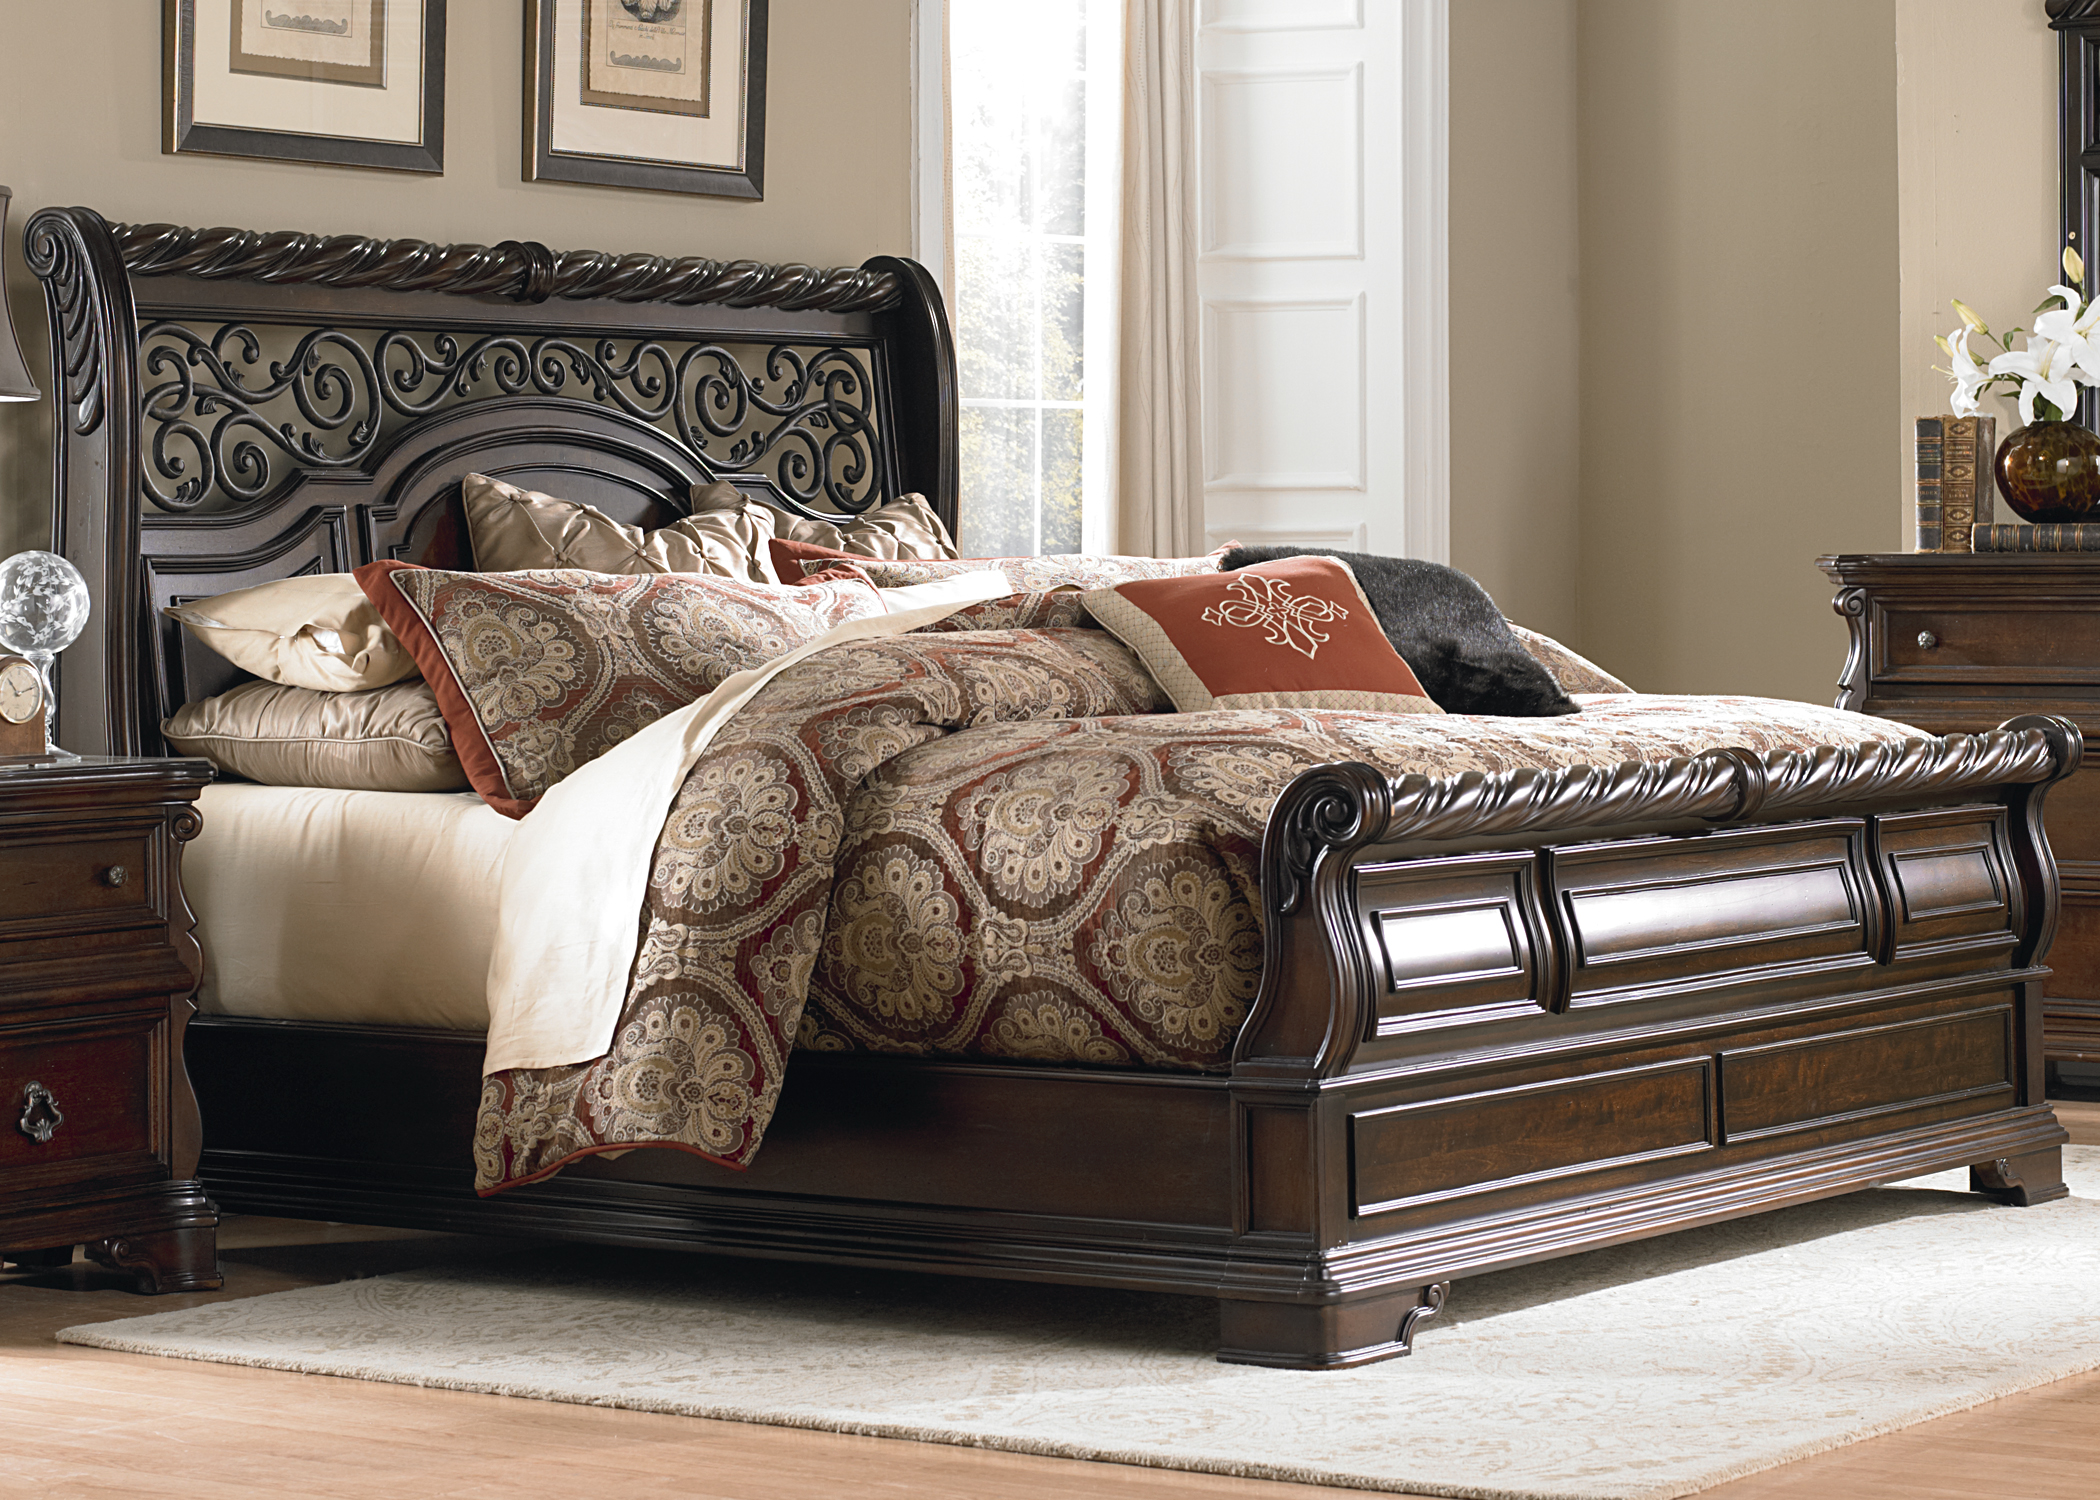 Liberty Furniture Arbor Place Bedroom King Sleigh Bed, Dresser, Mirror and Chest Collection